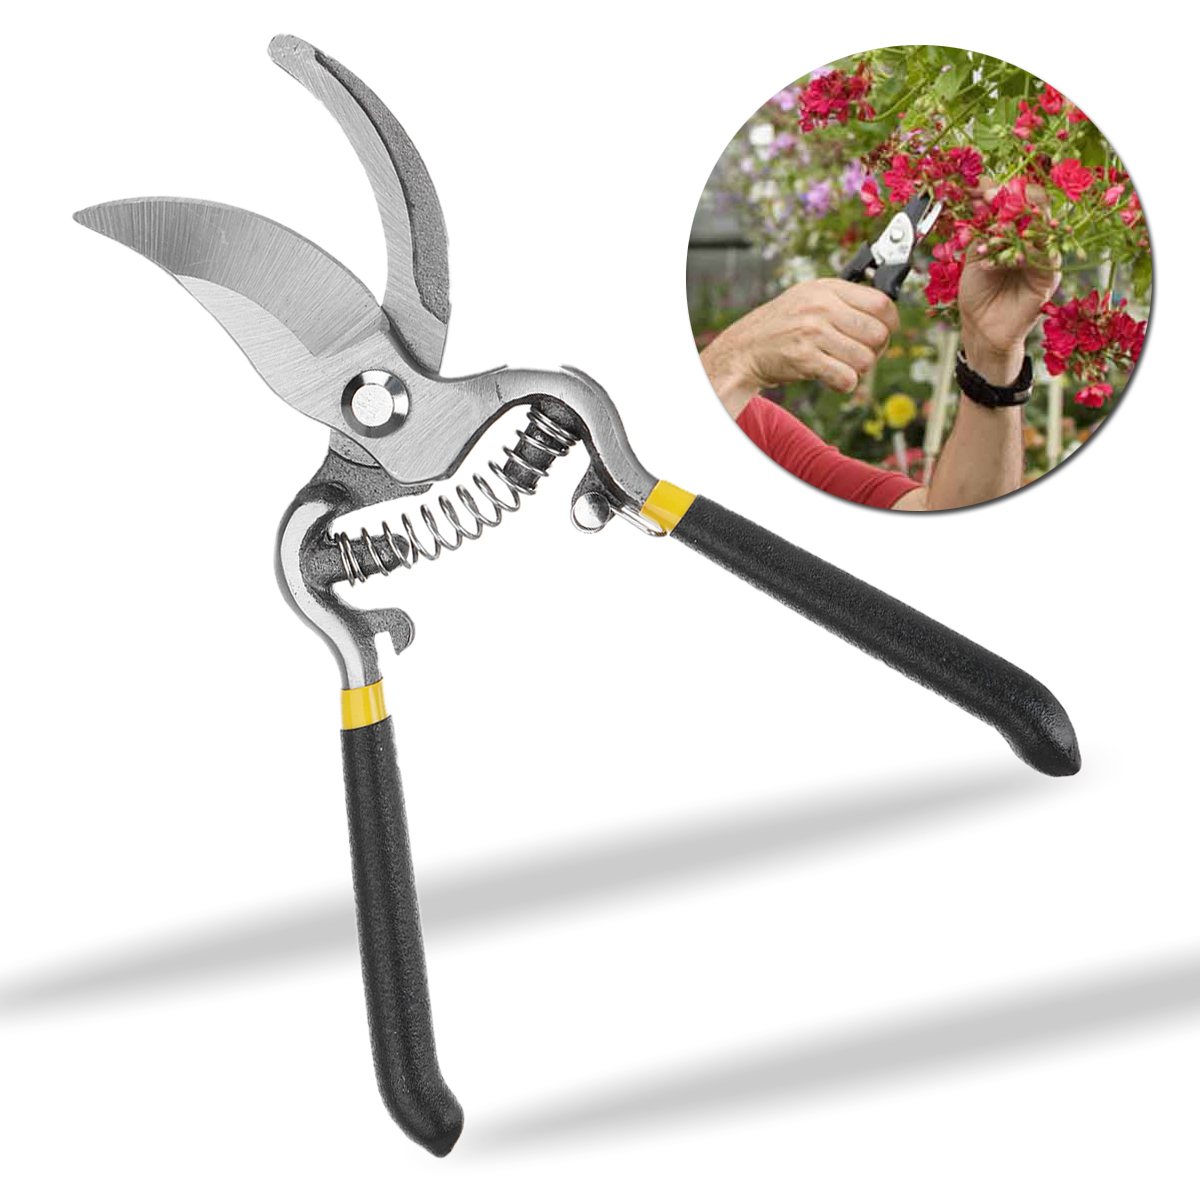 8inch-Carbon-Steel-Professional-Loppers-Garden-Cutter-Bypass-Tree-Pruning-Shears-Clippers-1412616-3